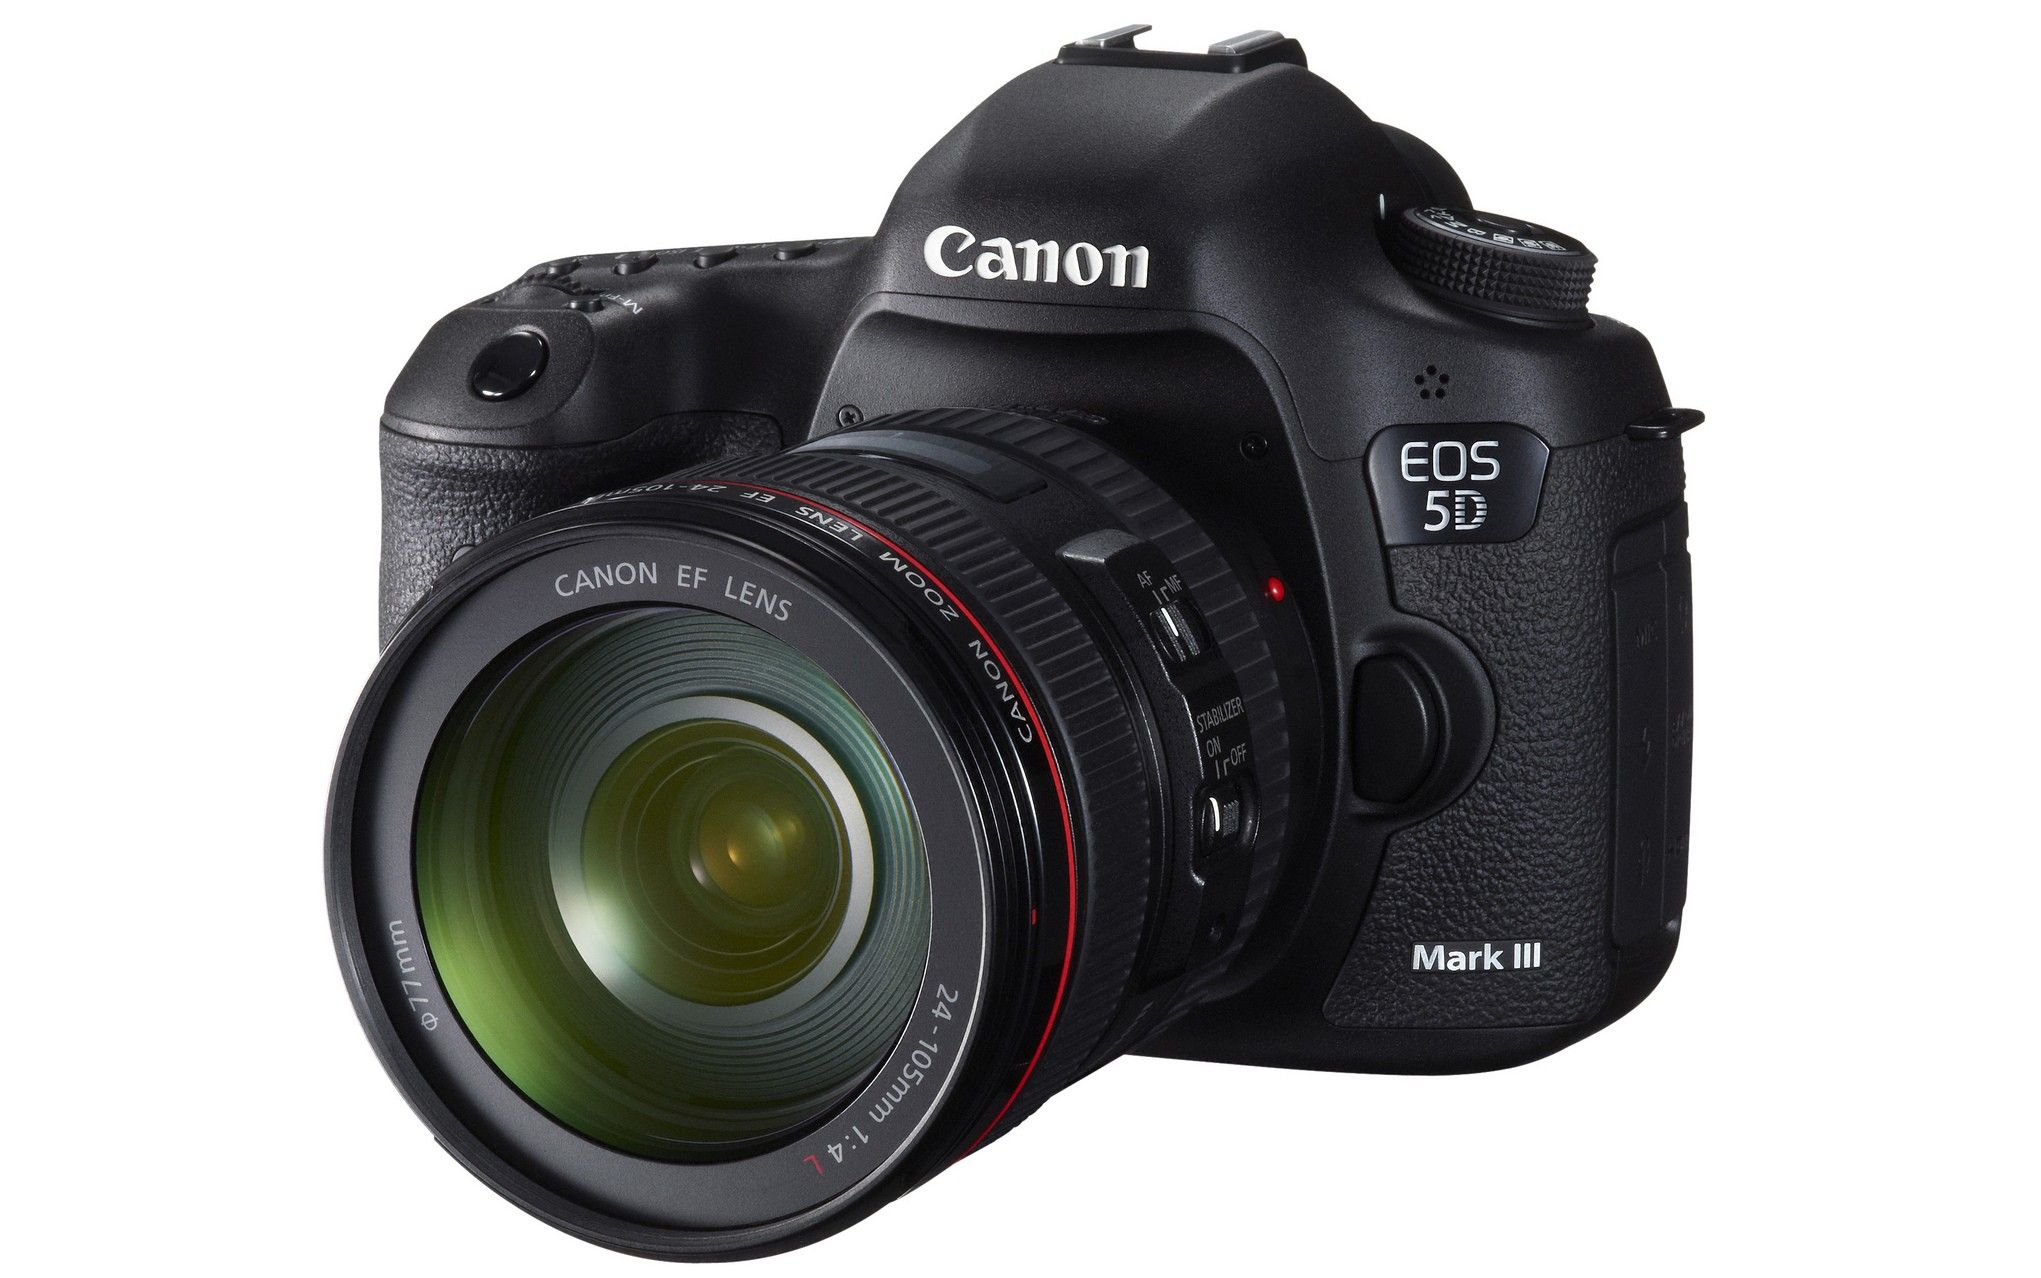 The Holy Grail: 4K RAW Video is Possible on EOS 5D Mark III